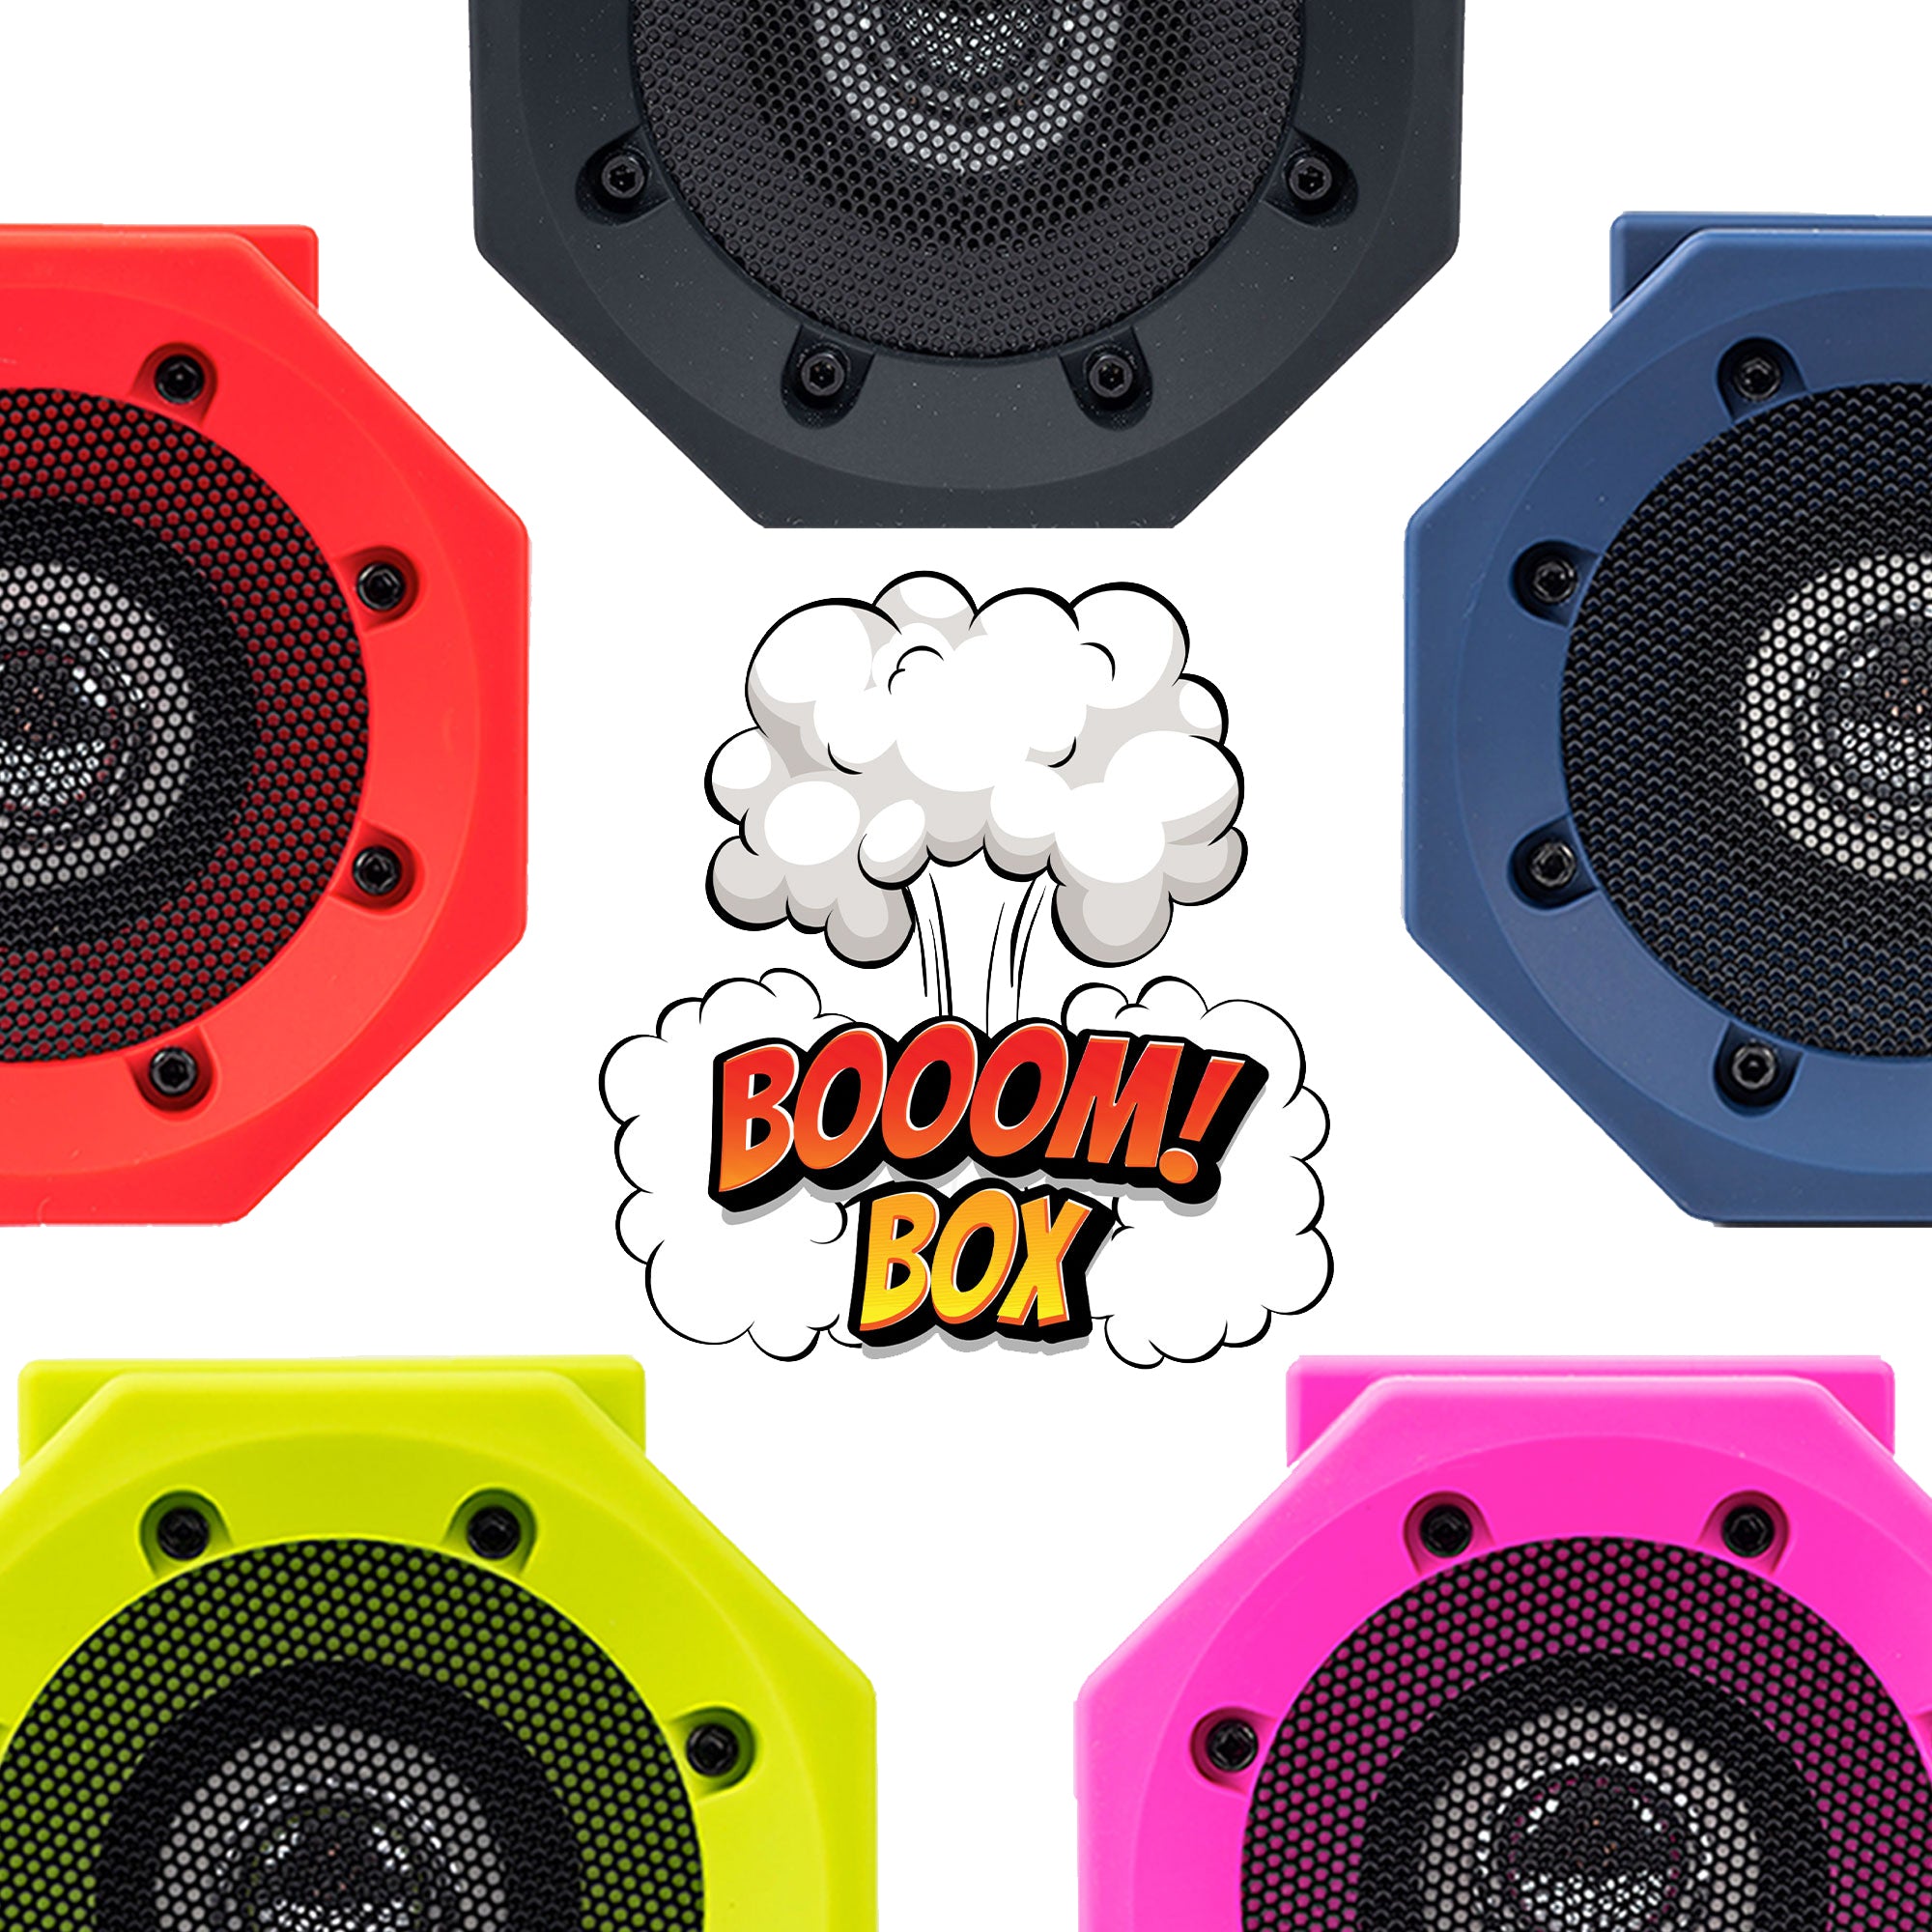 BOOOM BOX - Amplify your phone's volume 10x instantly!